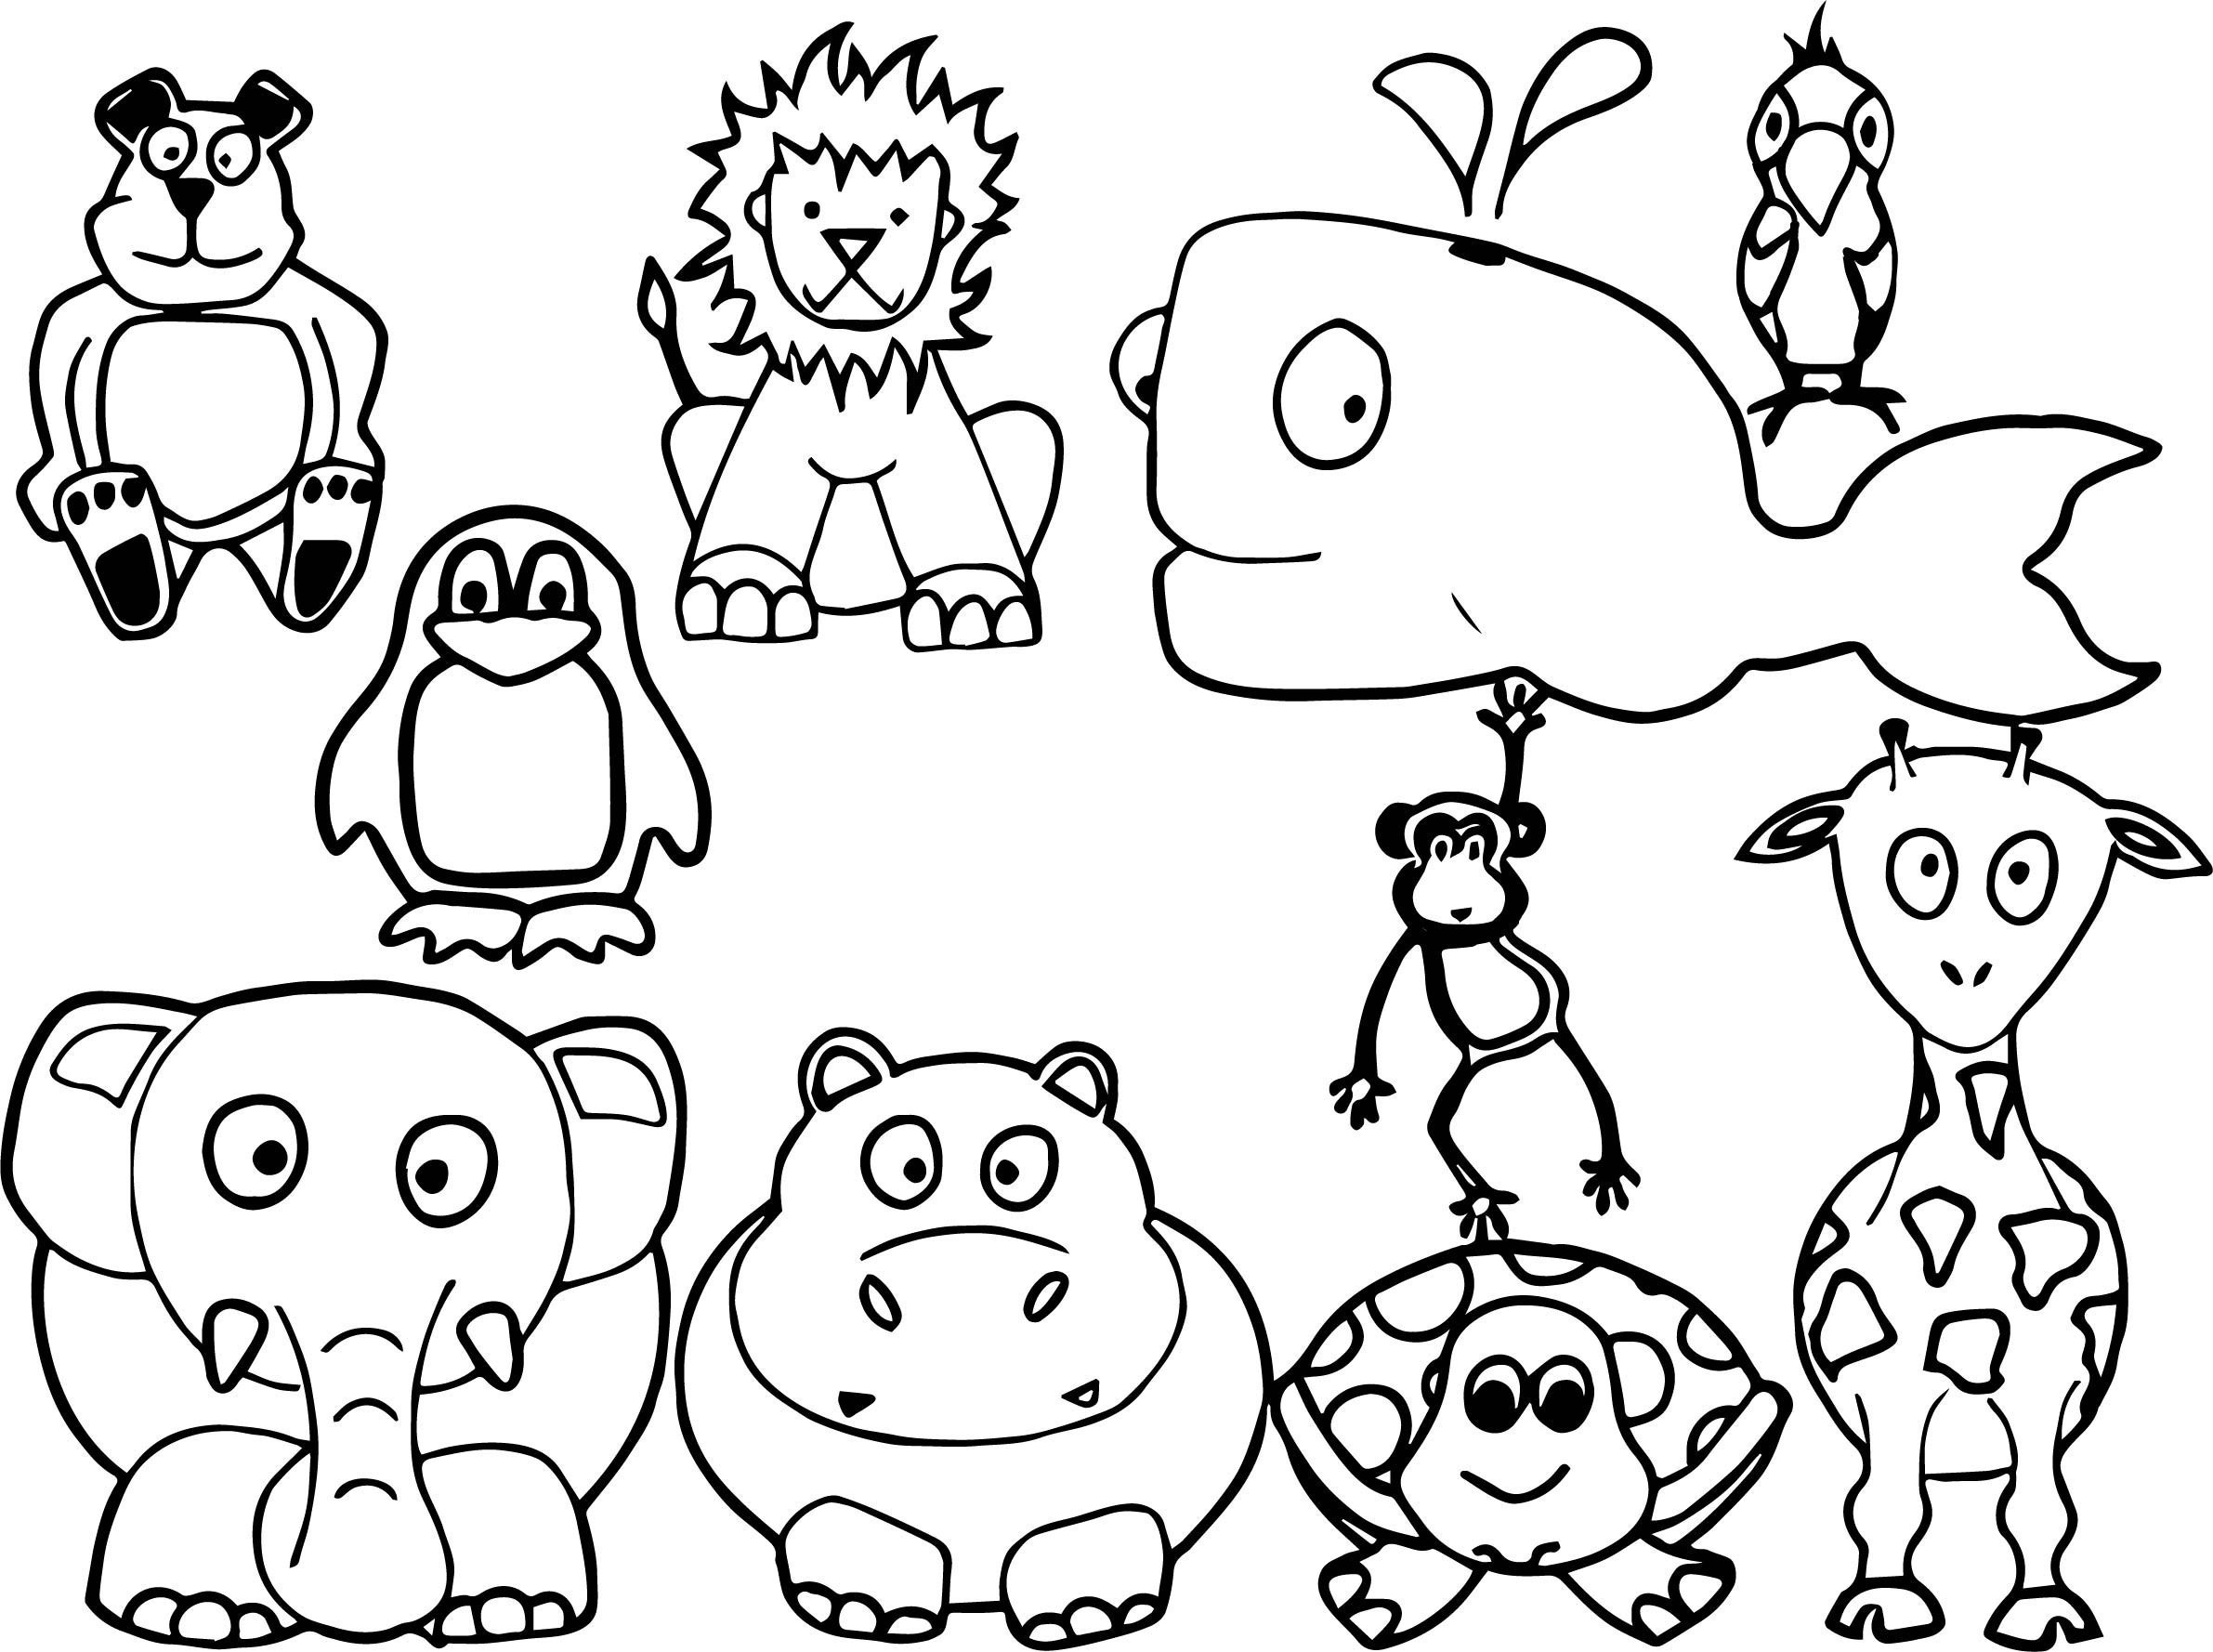 Free Animal Coloring Pages For Kids
 Animal Coloring Pages Best Coloring Pages For Kids